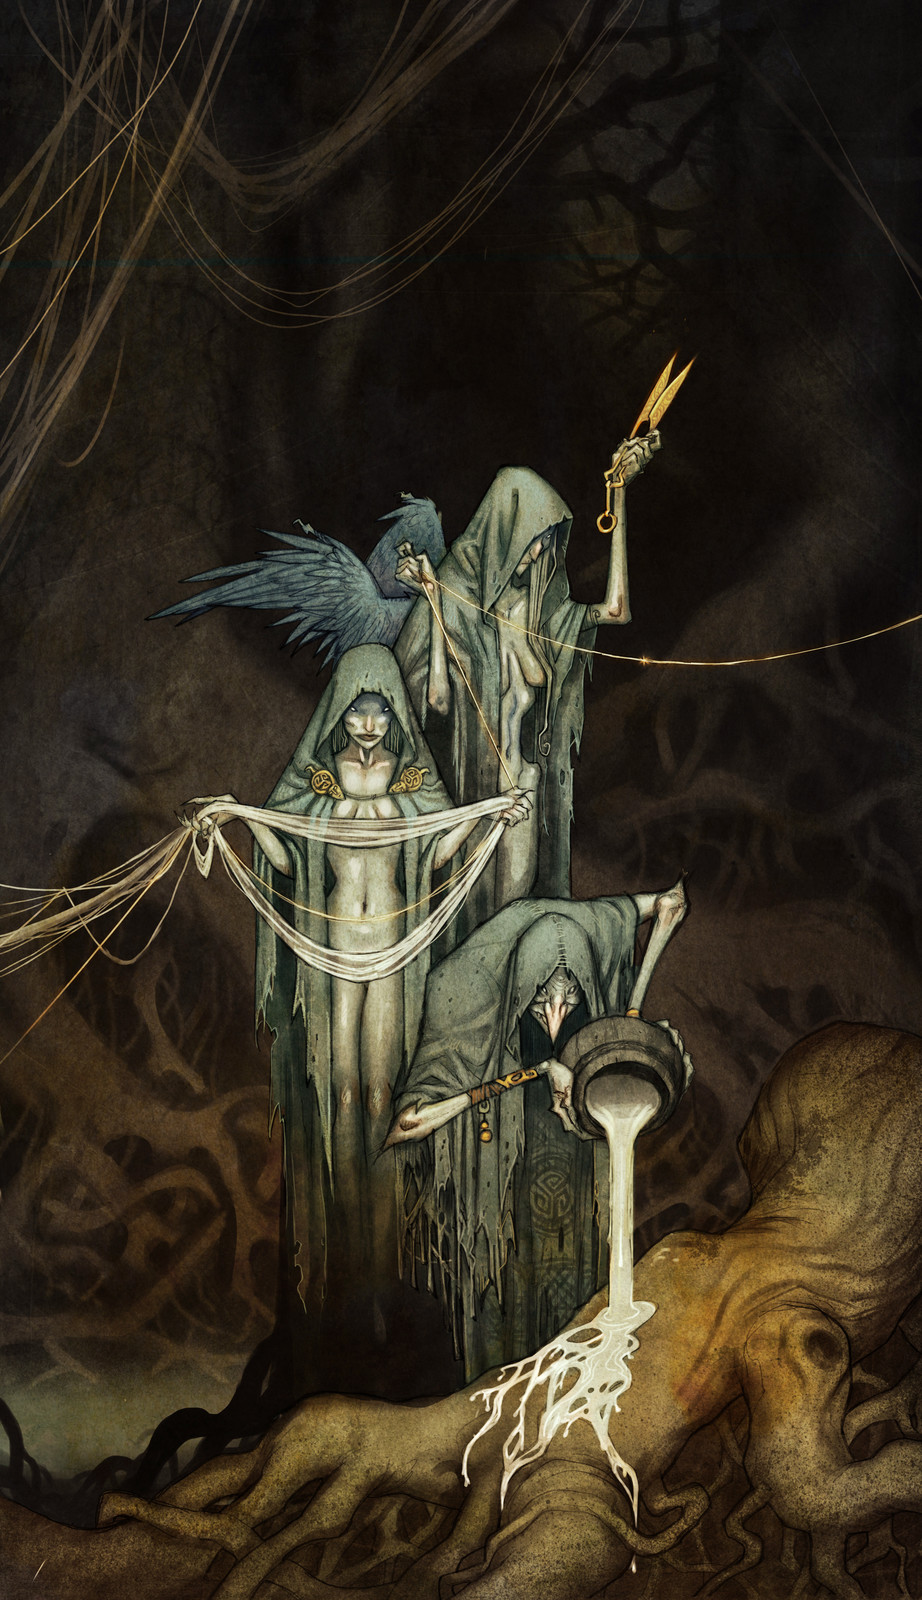 The Norns